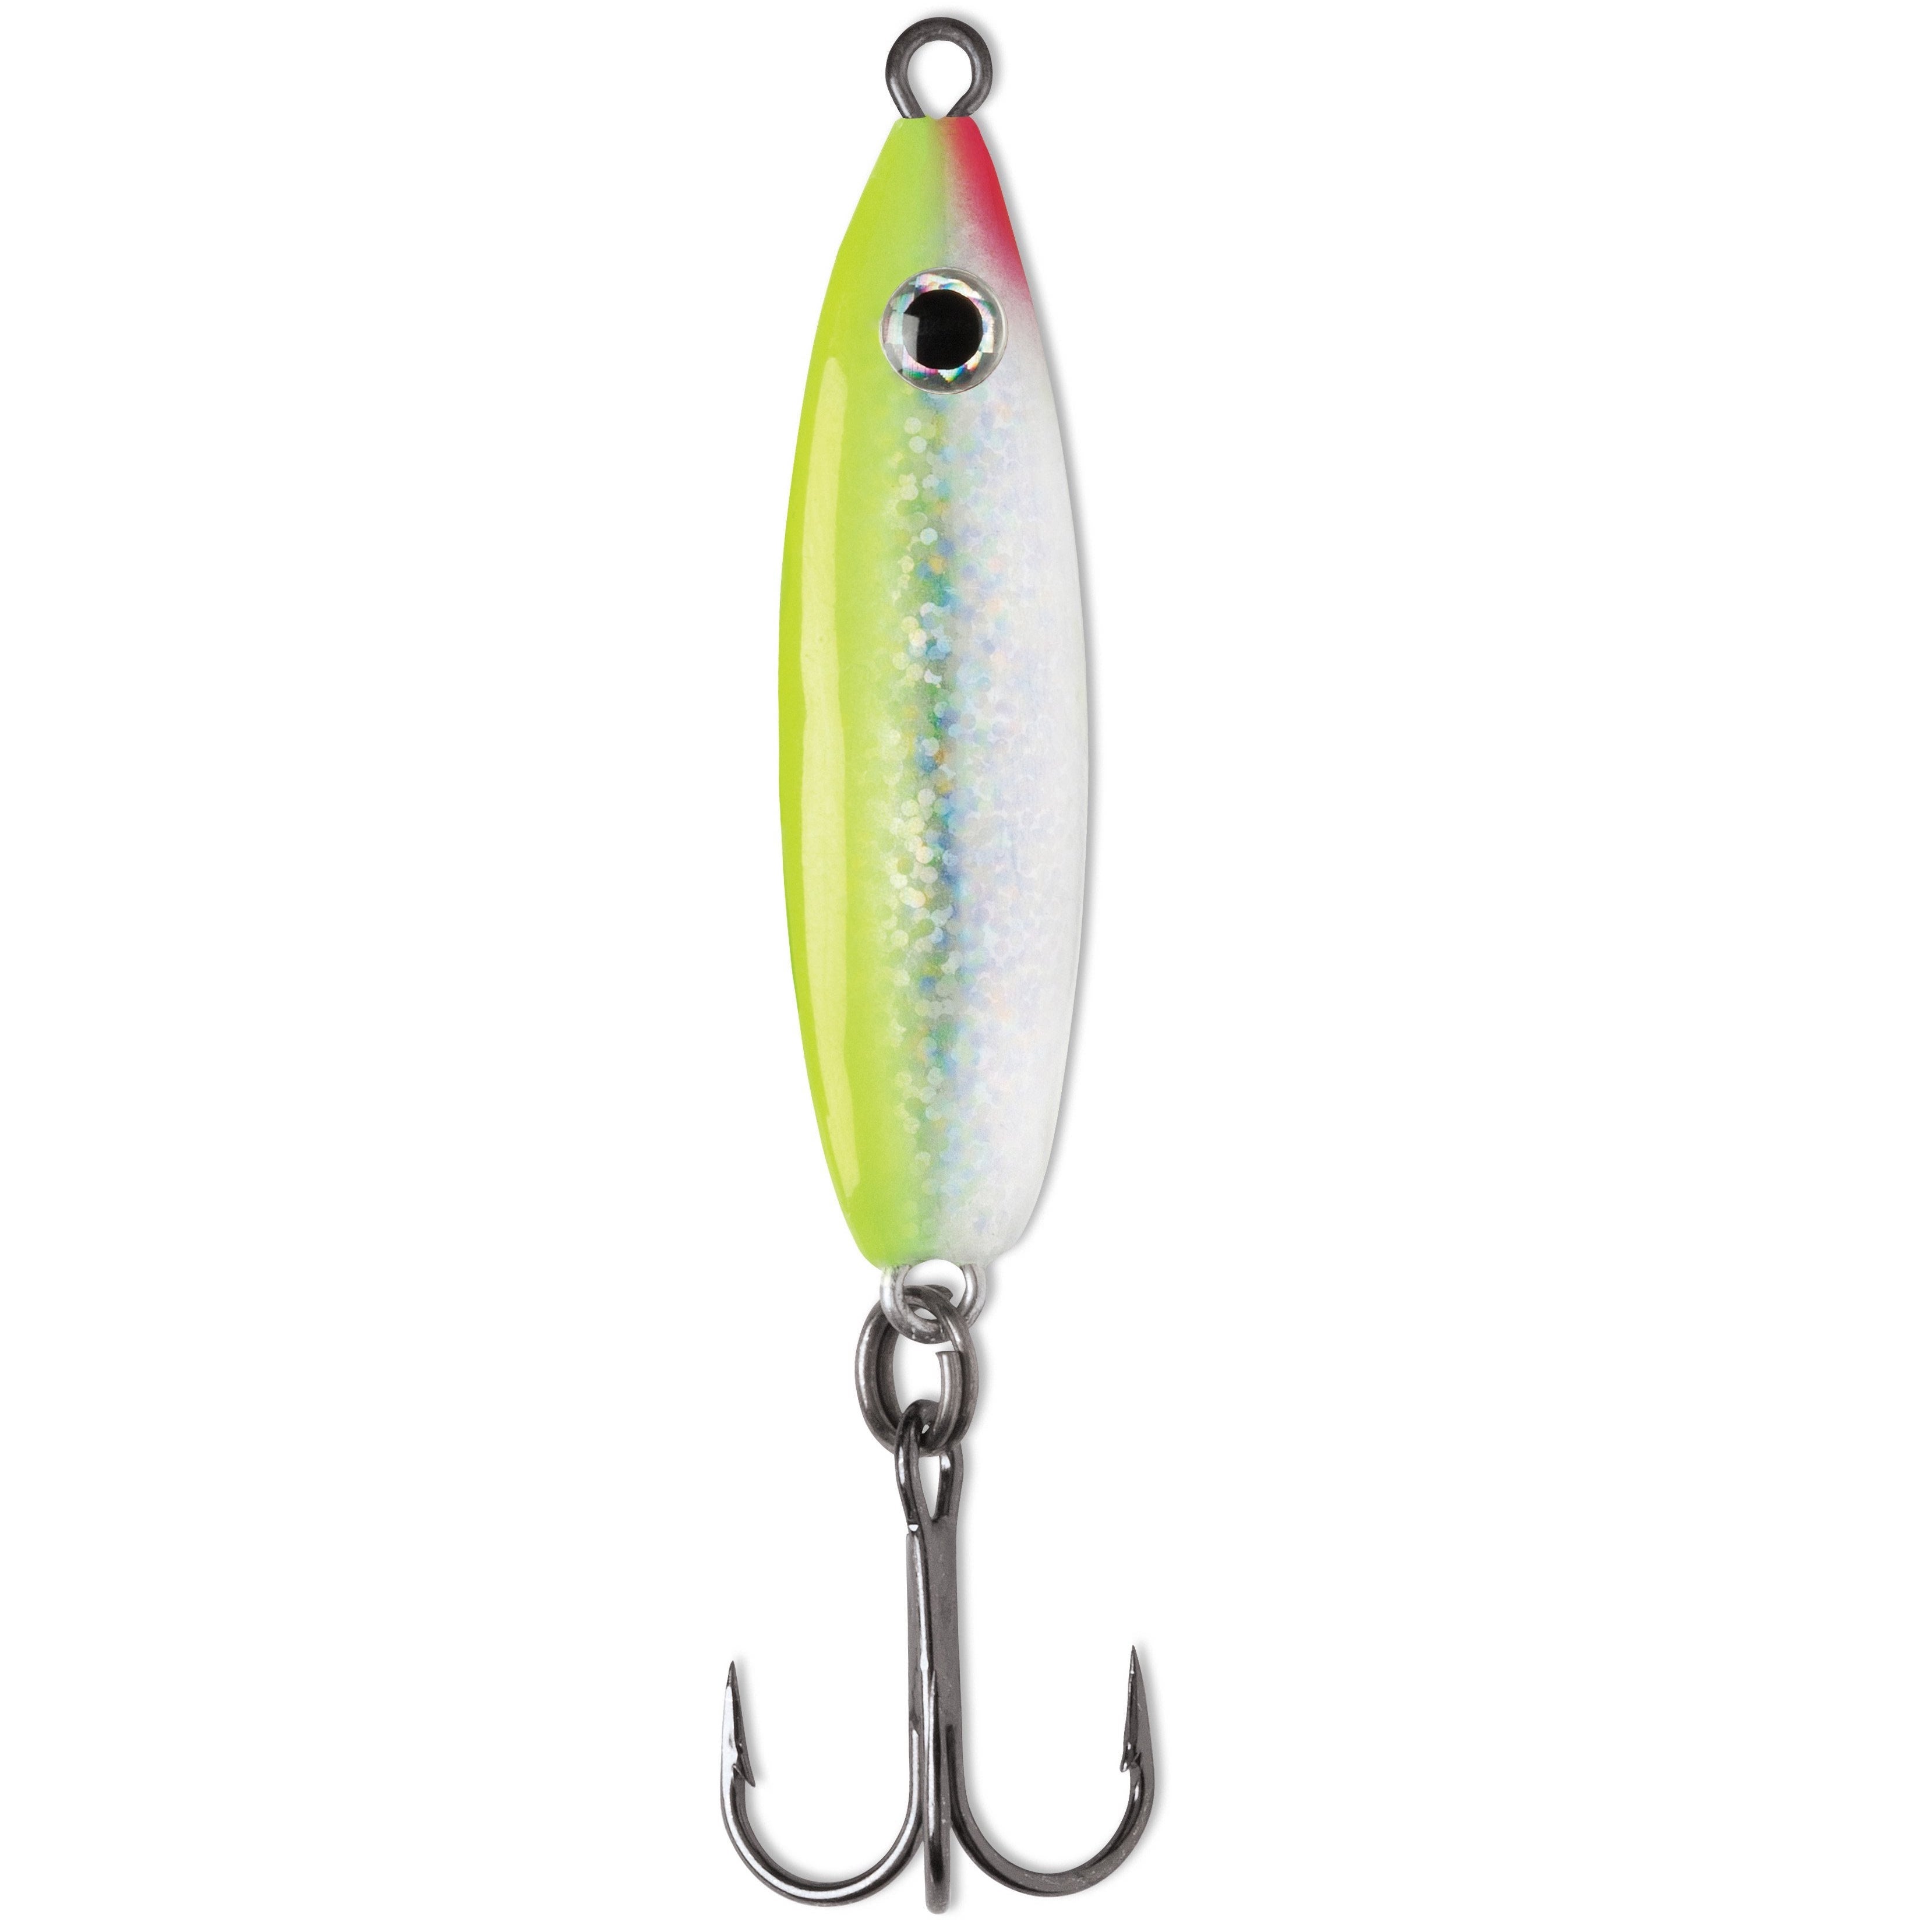 The Ultimate Guide to Jigging Spoons